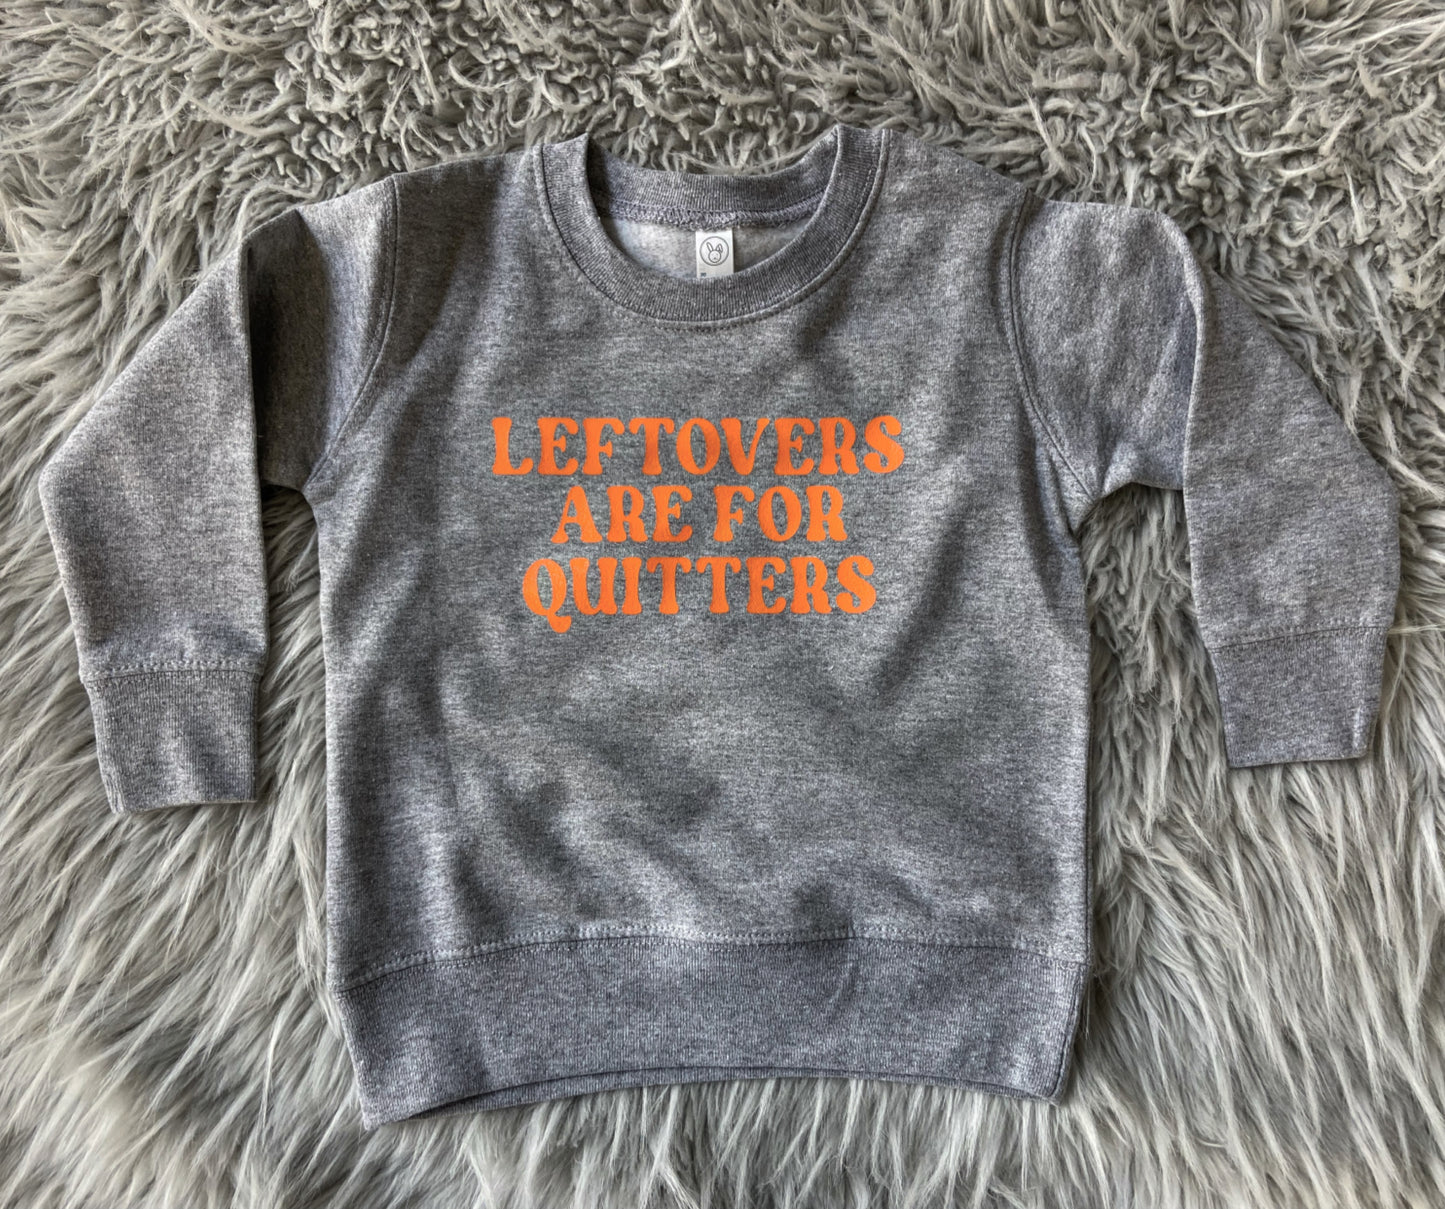 LEFTOVERS ARE FOR QUITTERS kids sweatshirt